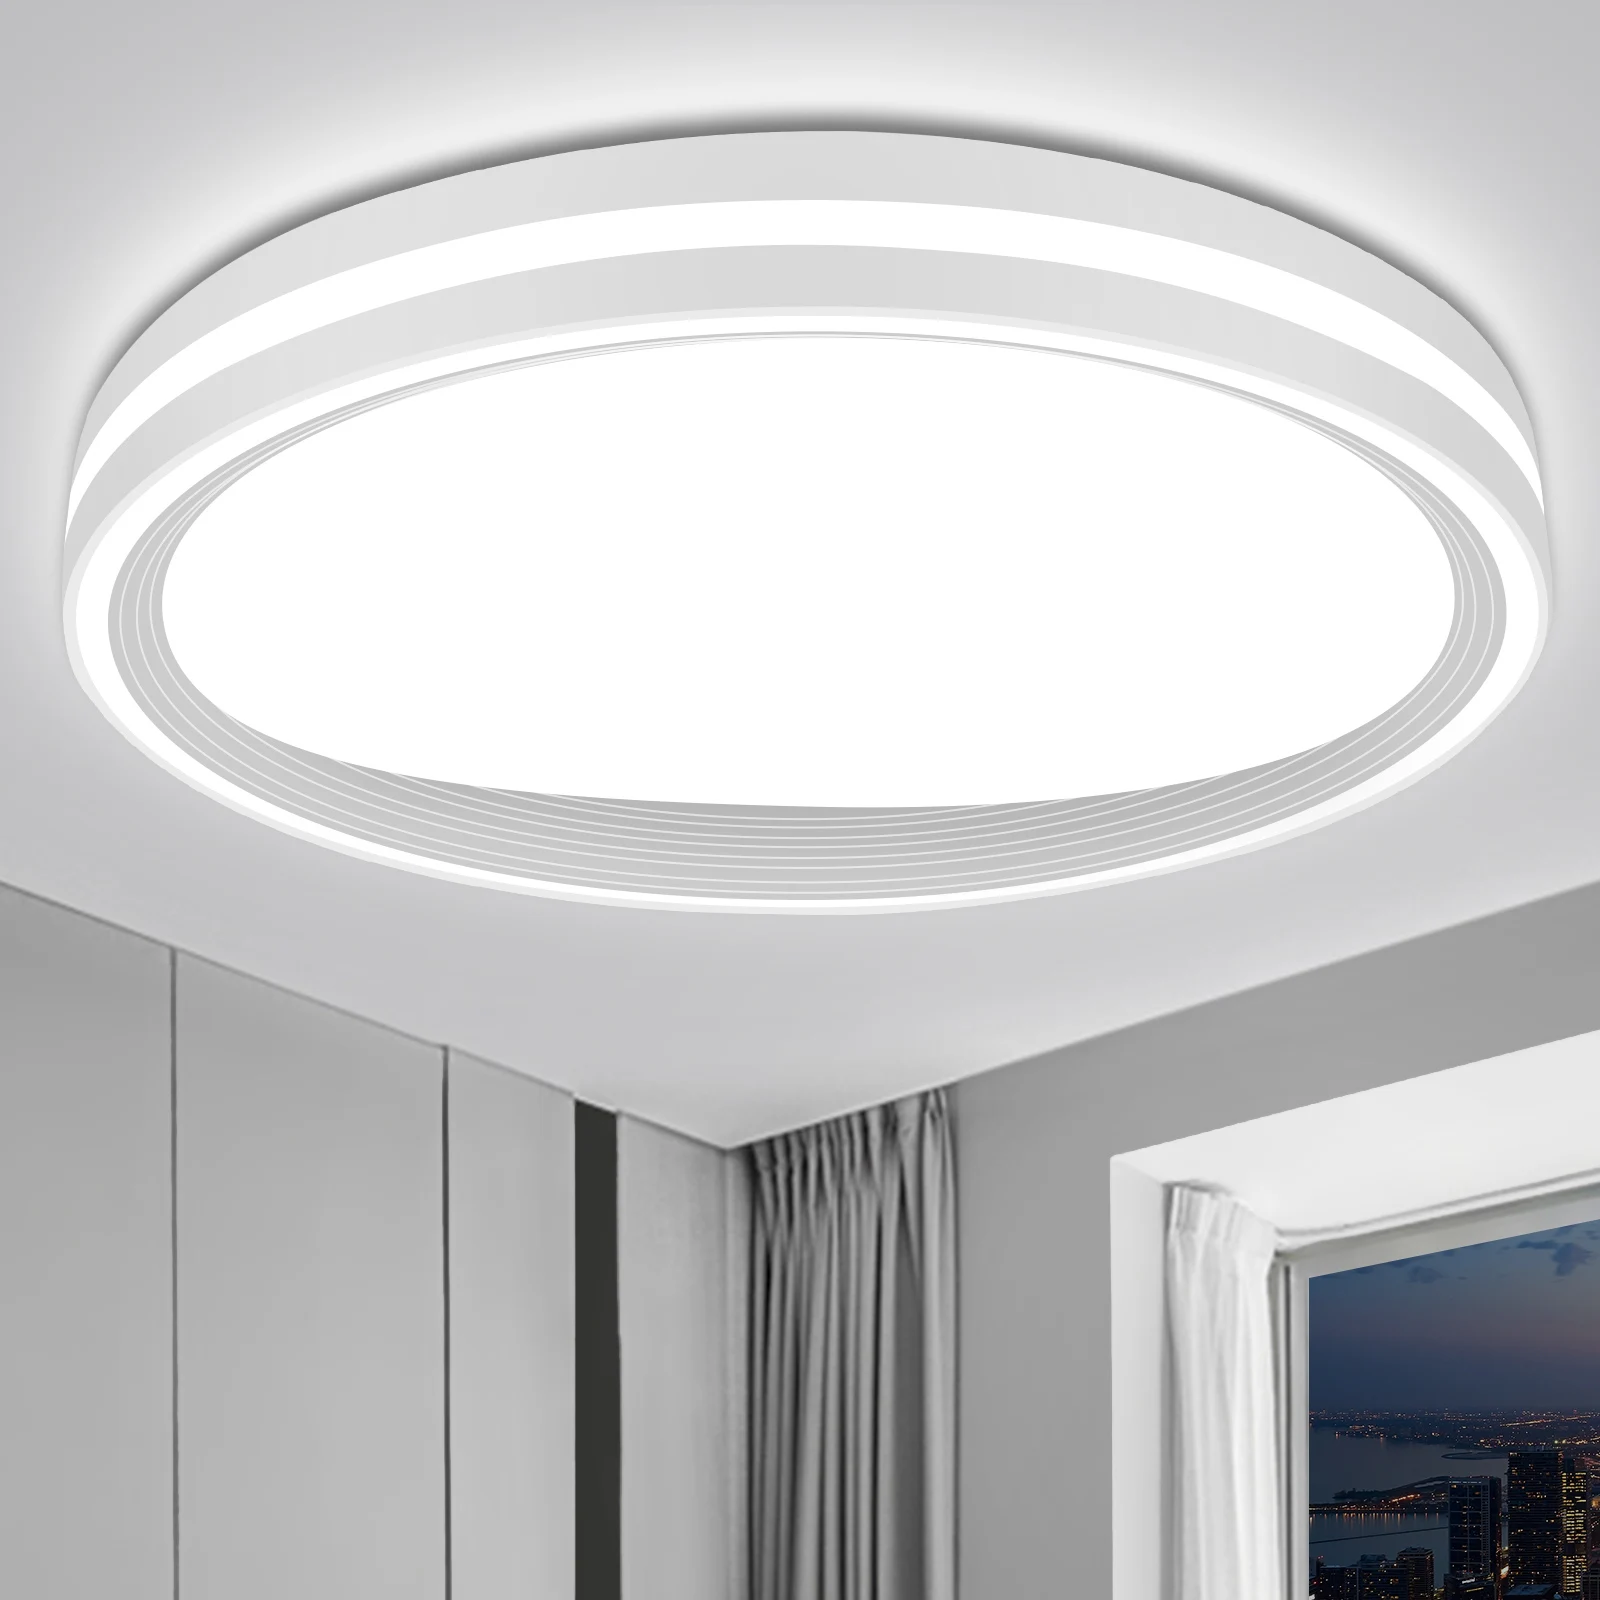 

2022 Modern Nordic Light Fixtures Pop Round Acrylic Ceiling Lamp 5000K High Quality hallway bedroom Led Ceiling Light